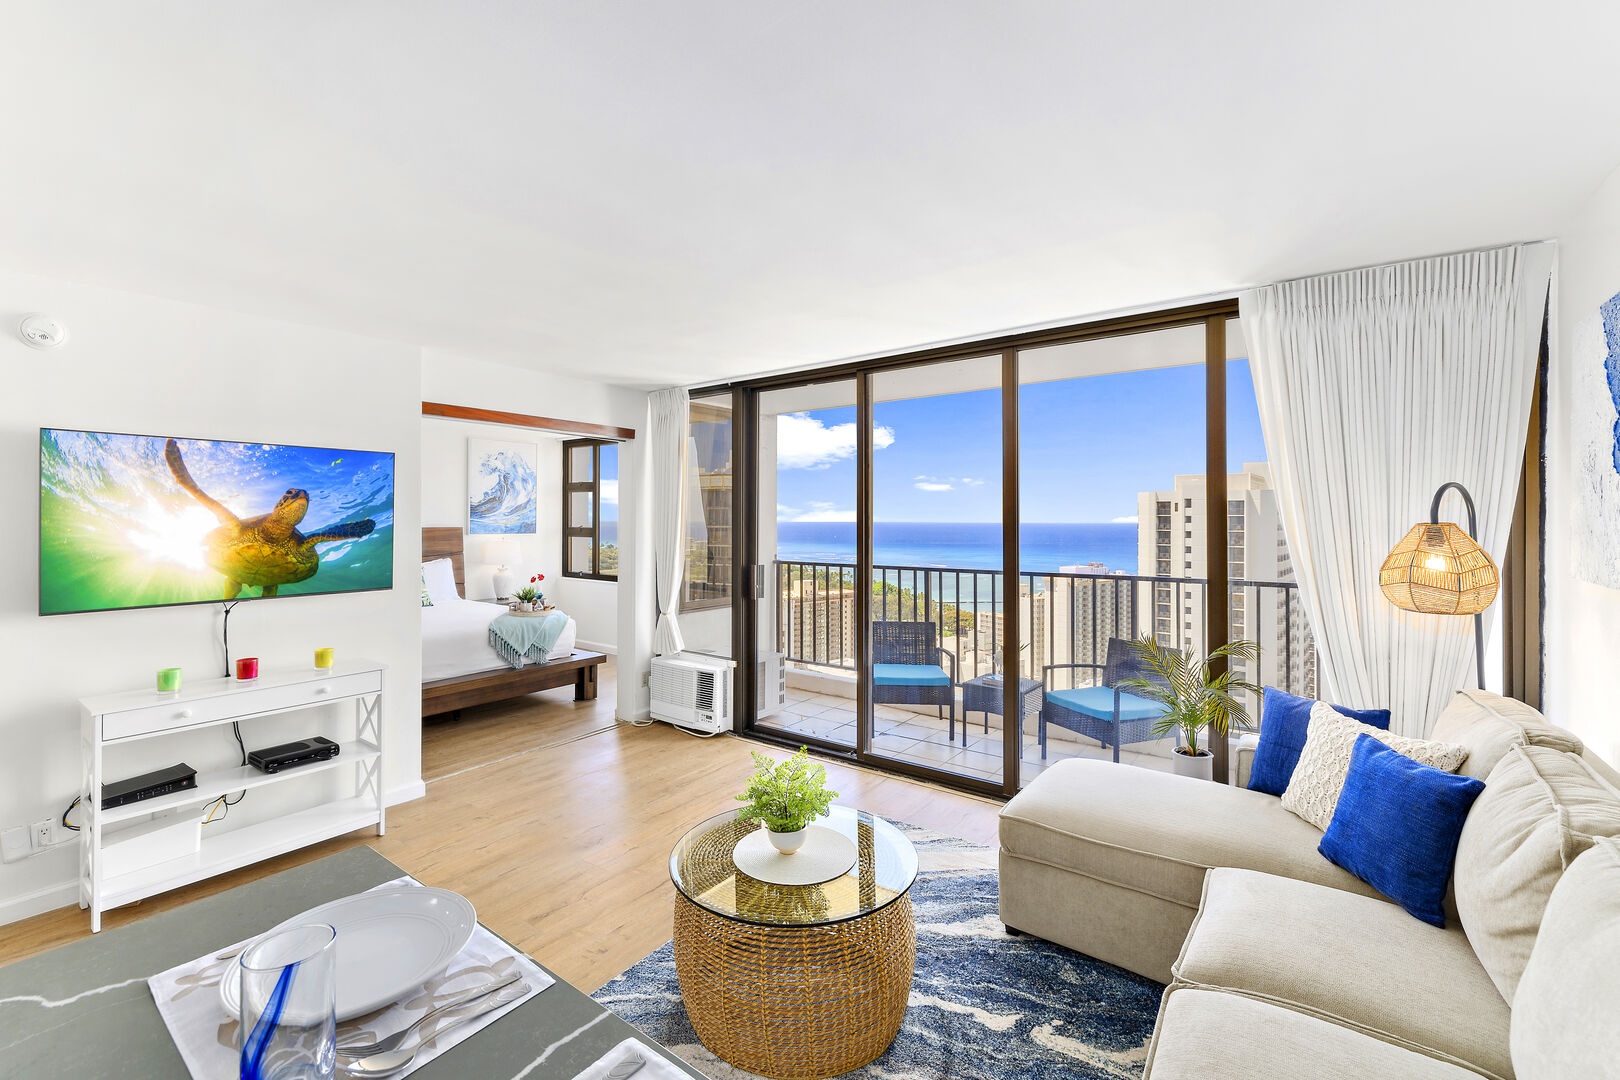 Fully renovated spacious condo with a stunning ocean view from the living room.